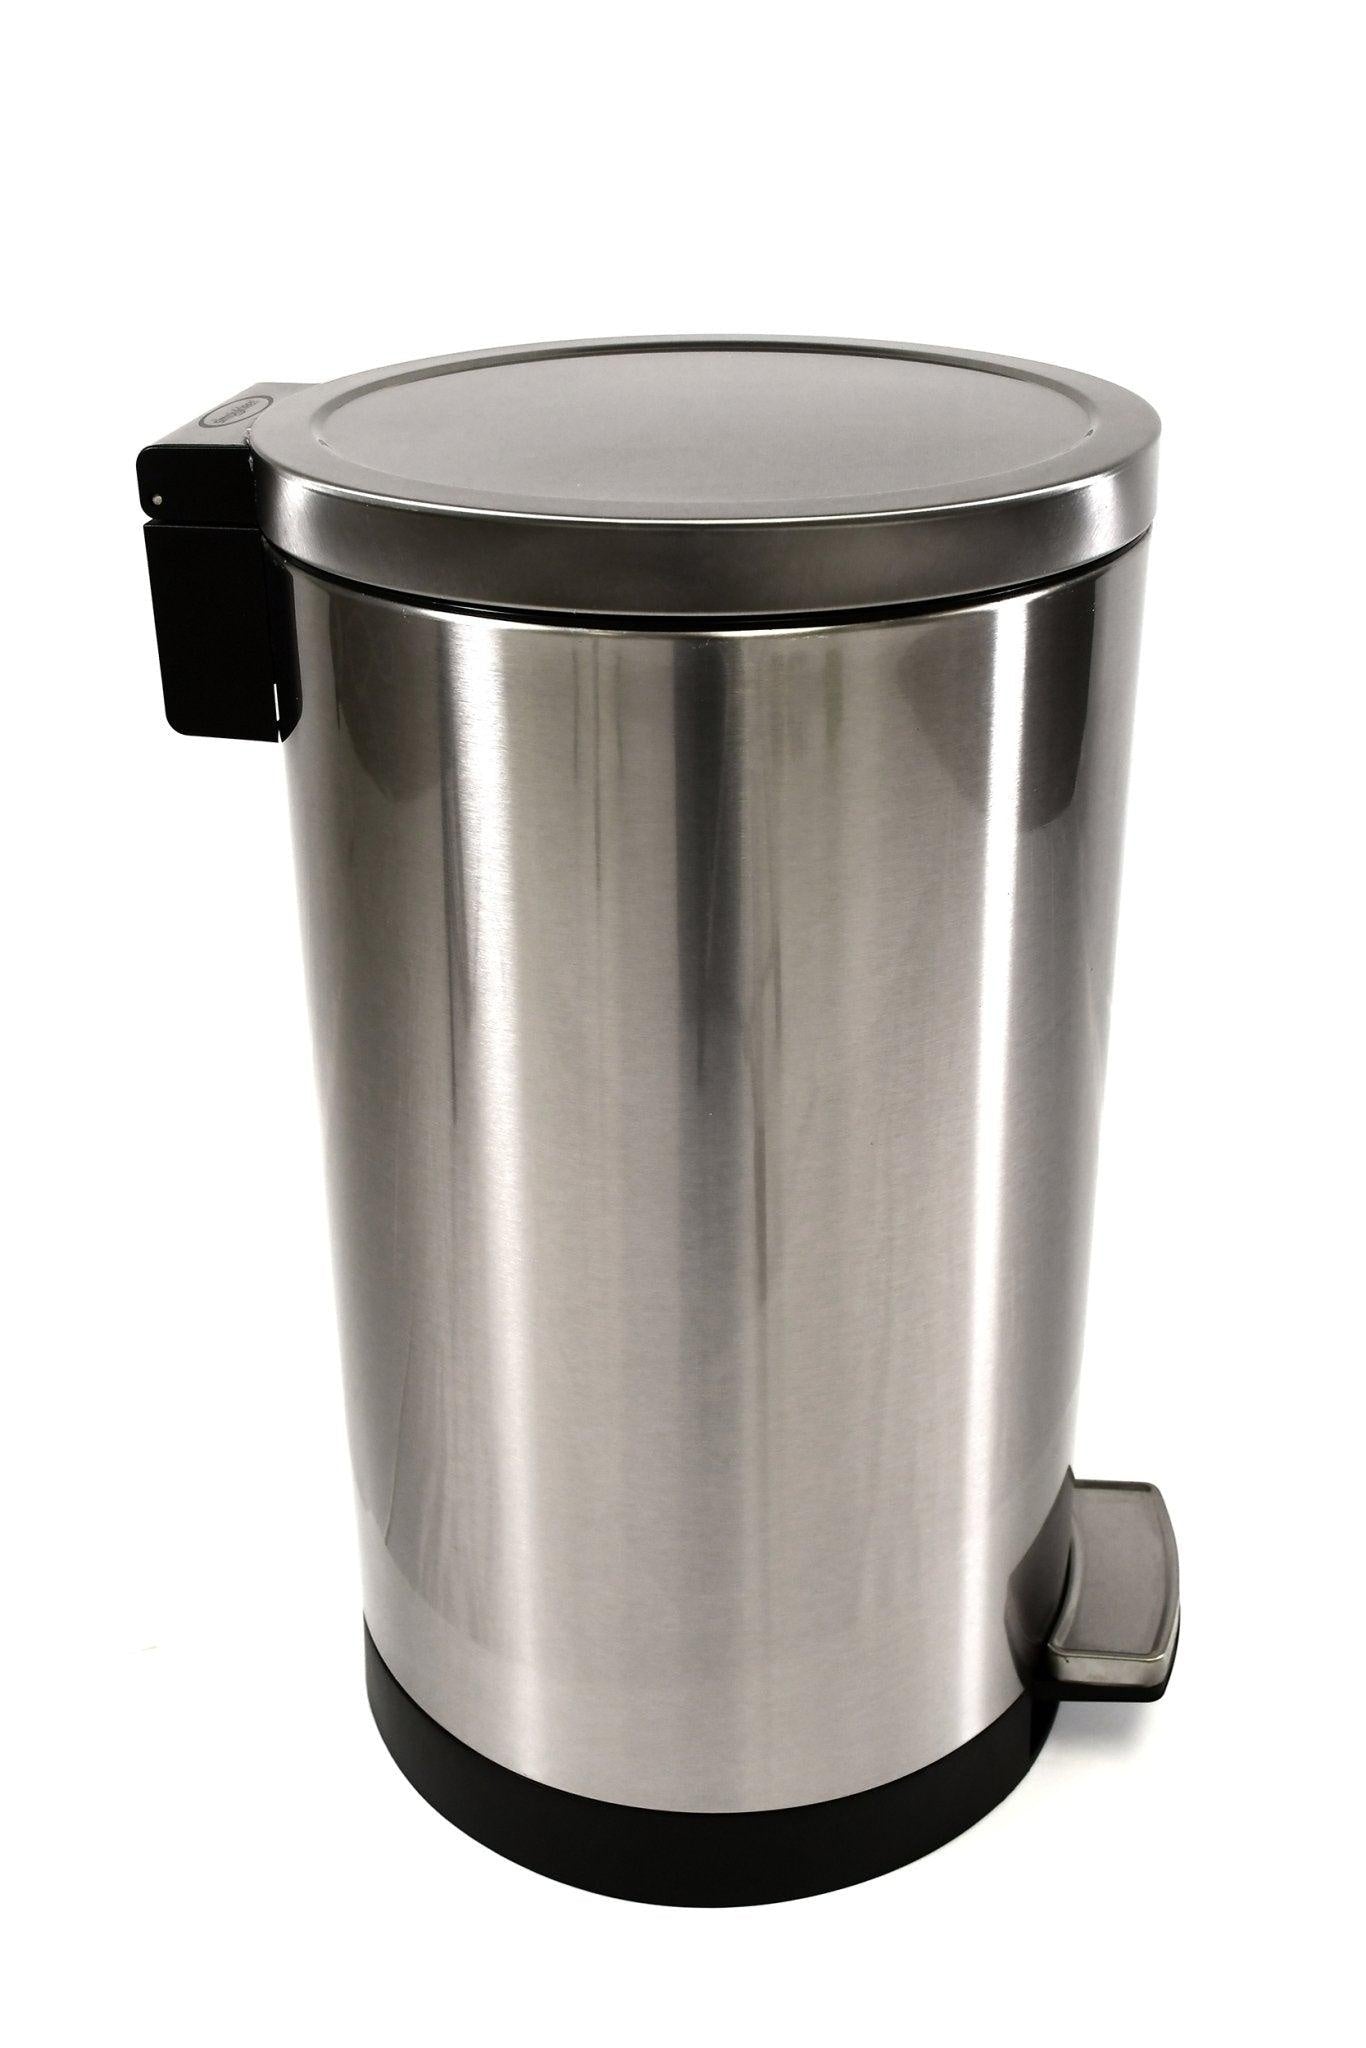 SimplyKleen Kleen-Fit Stainless Steel Trash Can with Lid